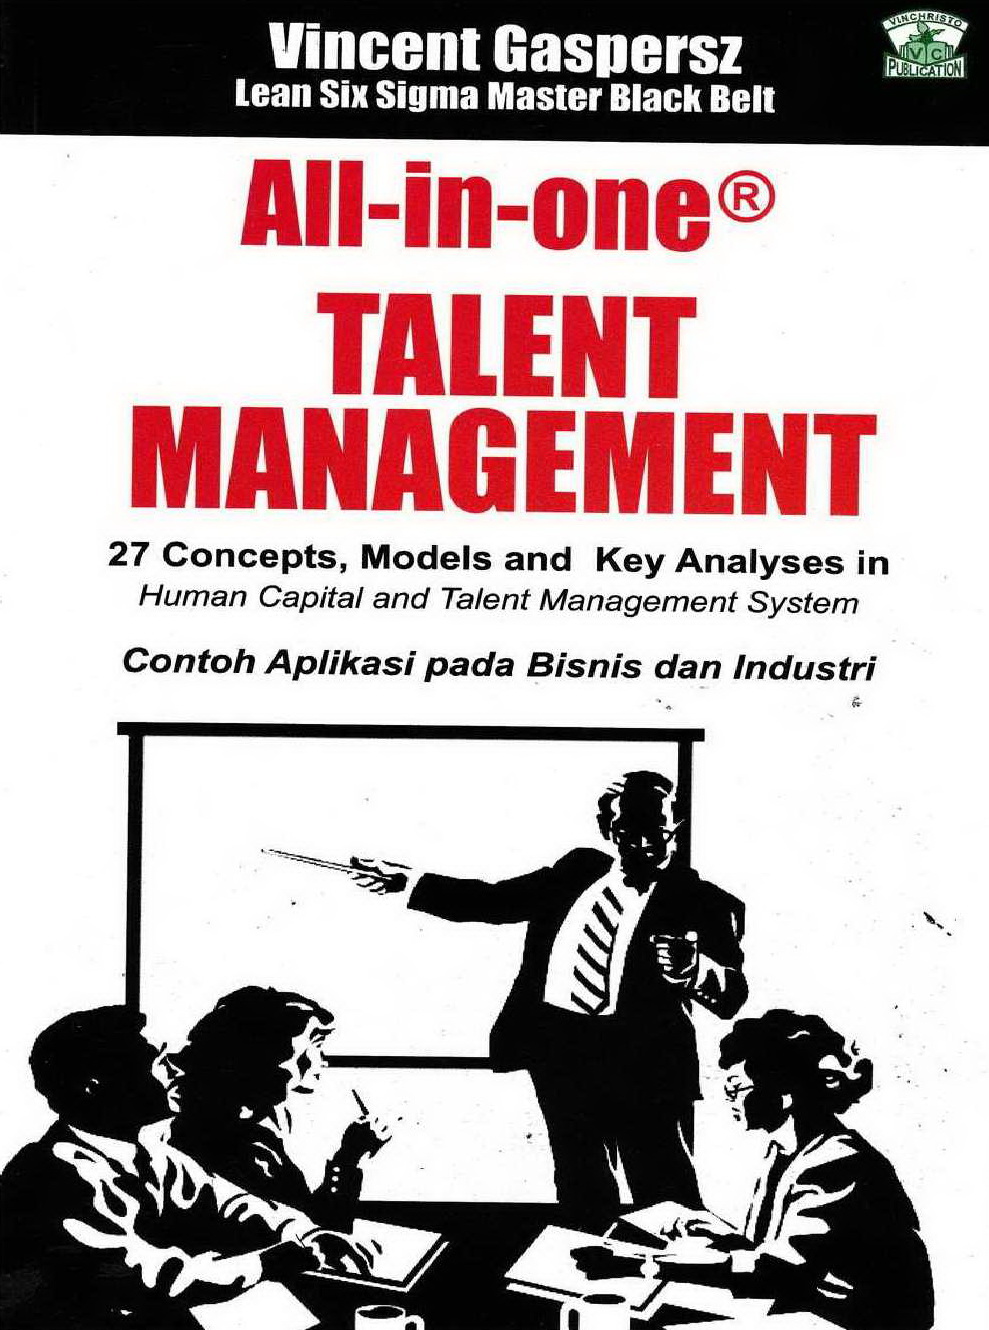 2012 All-in-One Talent Management VG